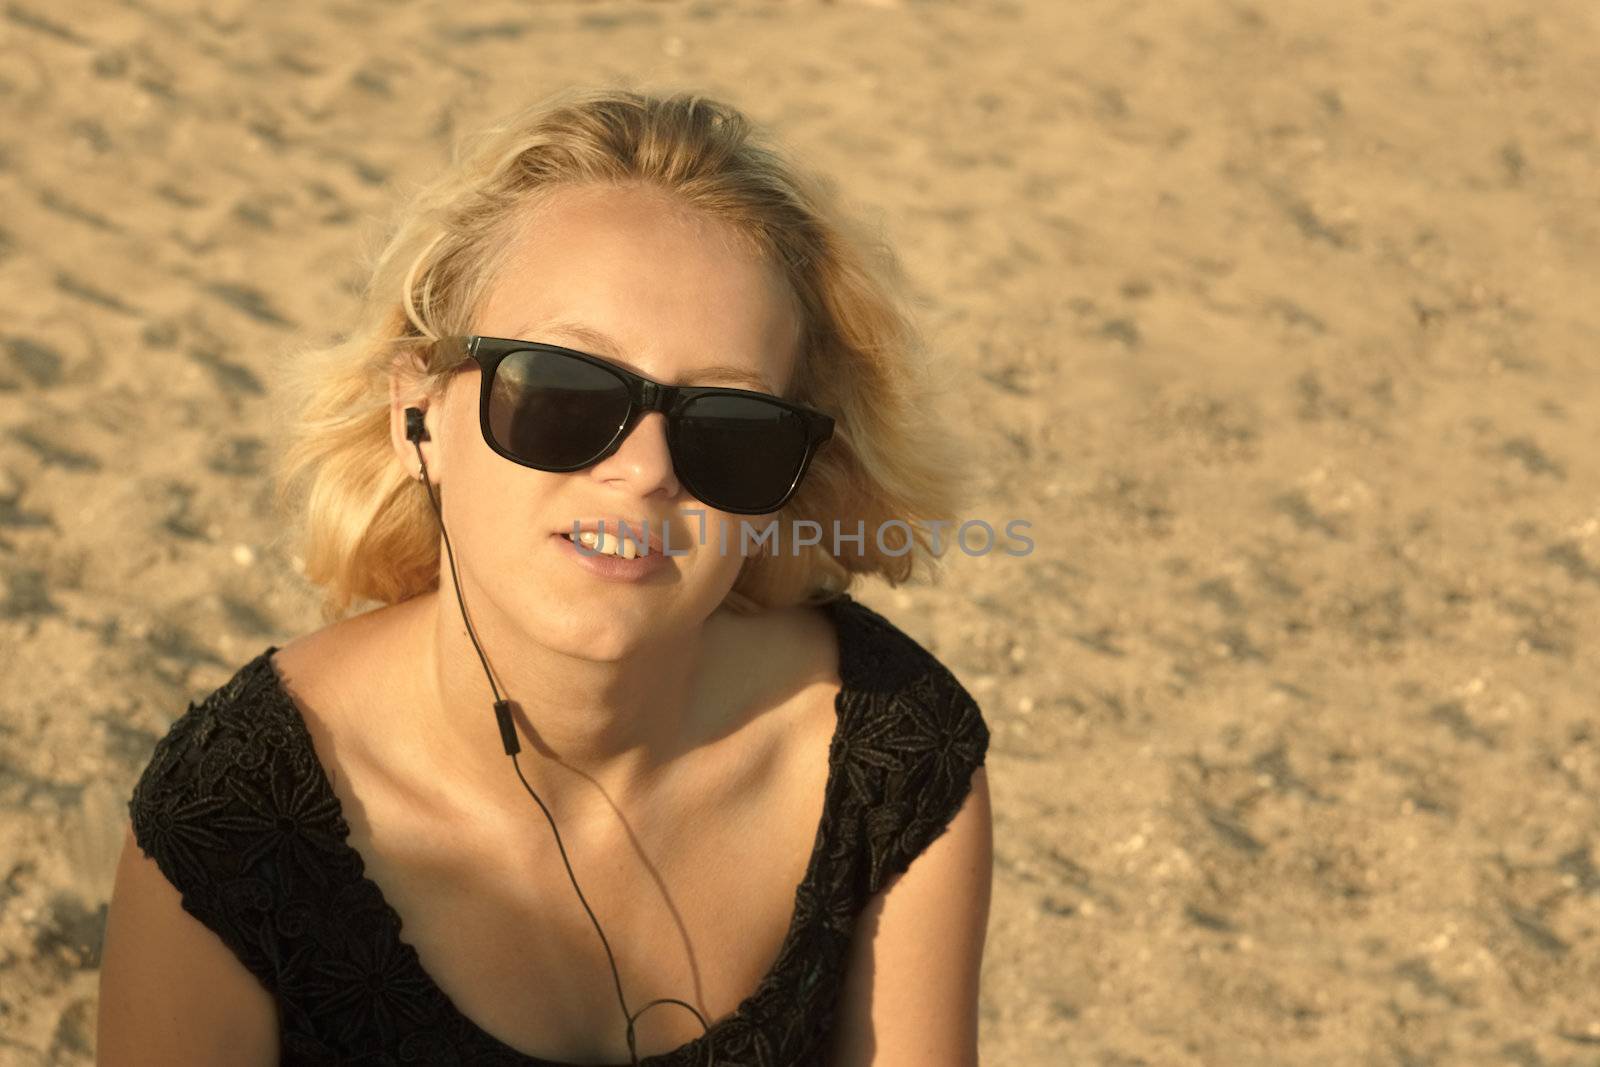 Young girl on the sandy beach by qiiip